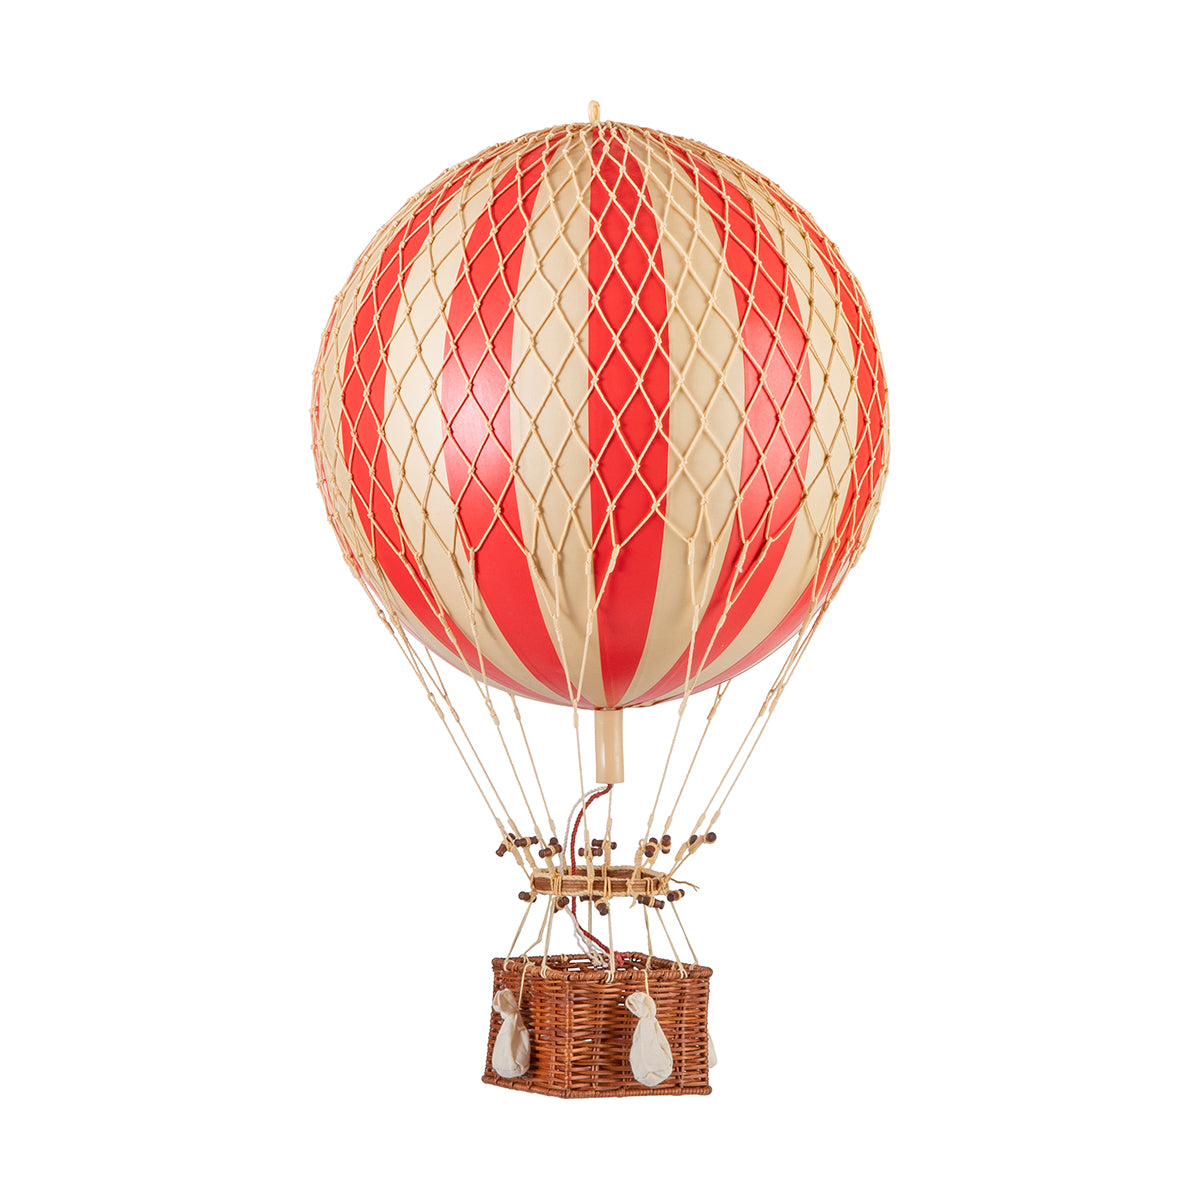 A Wonderen Medium Hot Air Balloon - Royal Aero, adorned in red and white, gracefully floats through clear skies, granting a unique perspective as it ascends to new heights.